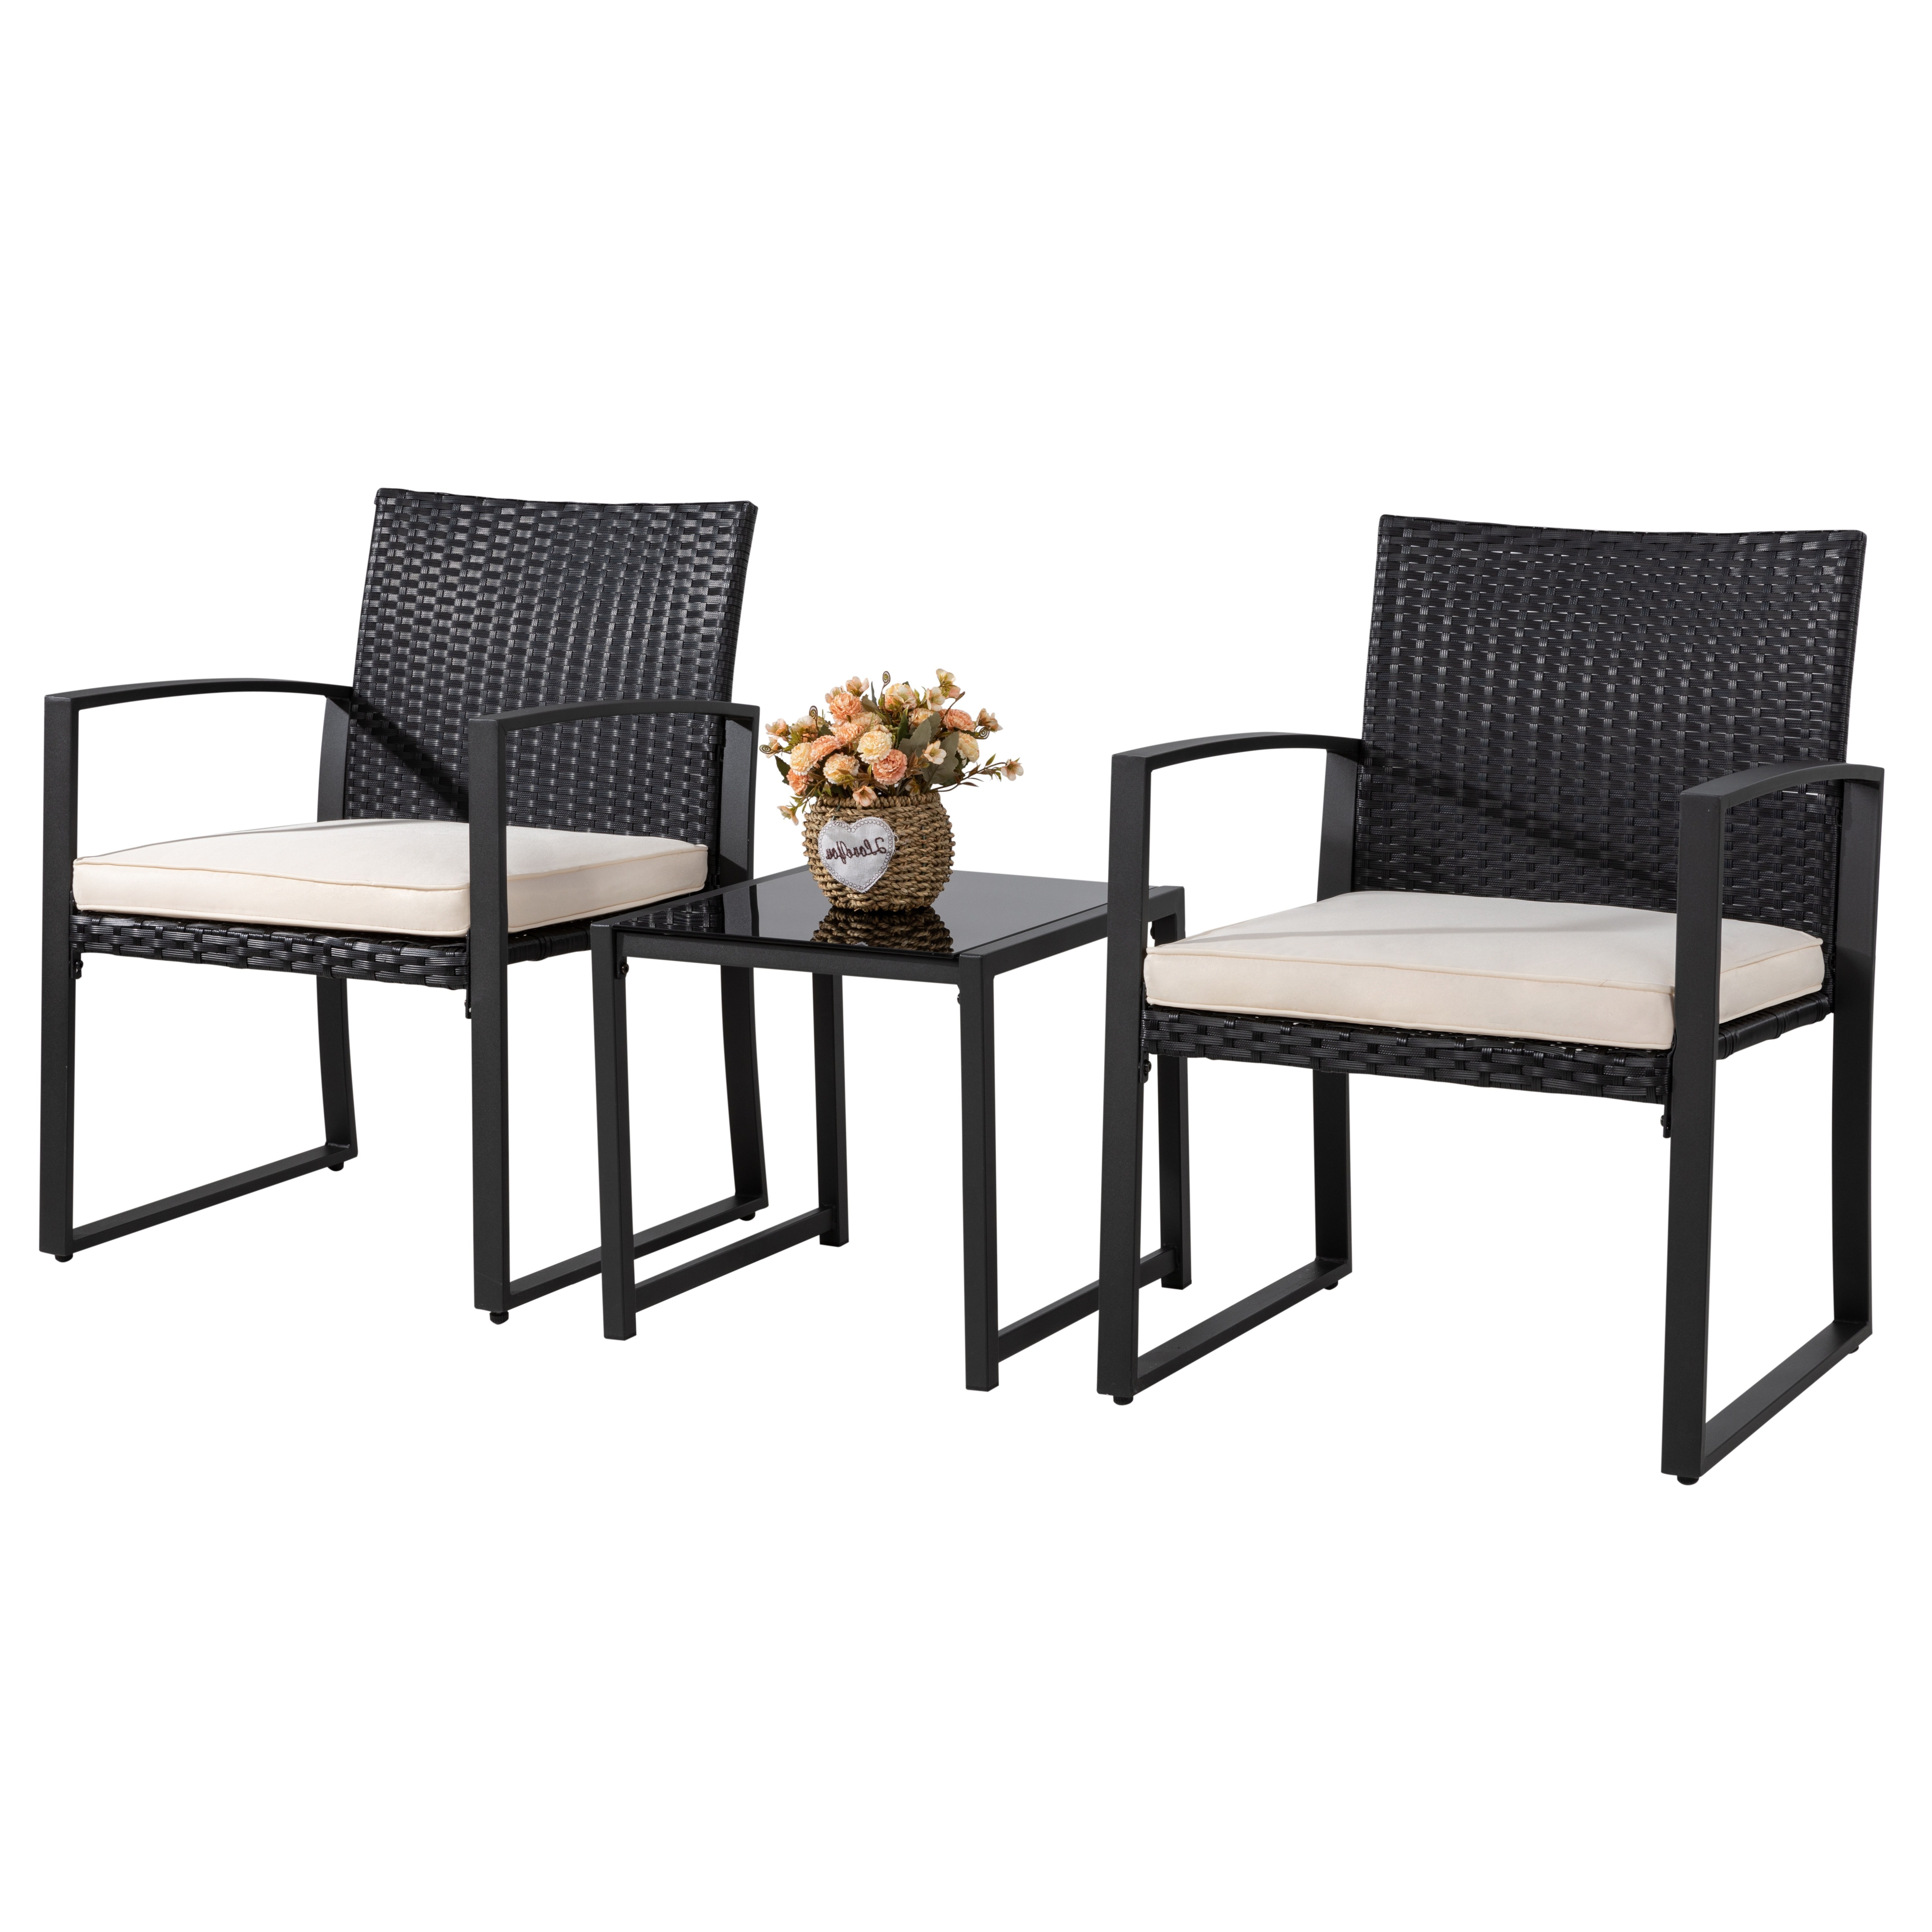 

Sunlei 3 Pieces Outdoor Patio Furniture Set, Modern Wicker Bistro Set, Conversation Rattan Chair Of 2 With Coffee Table For Yard Porch Poolside Lawn